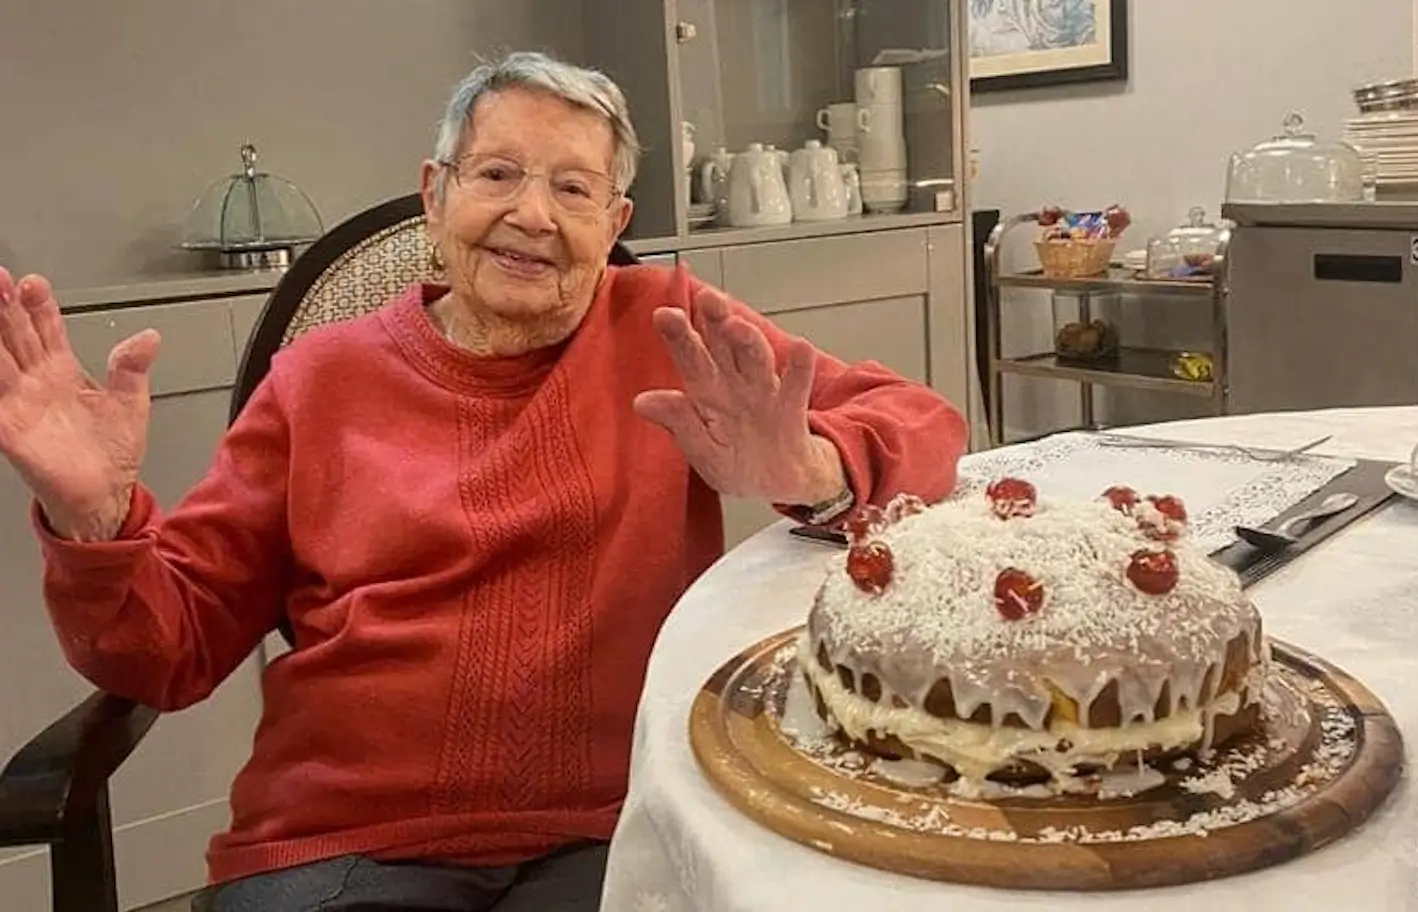 residents baking a cake